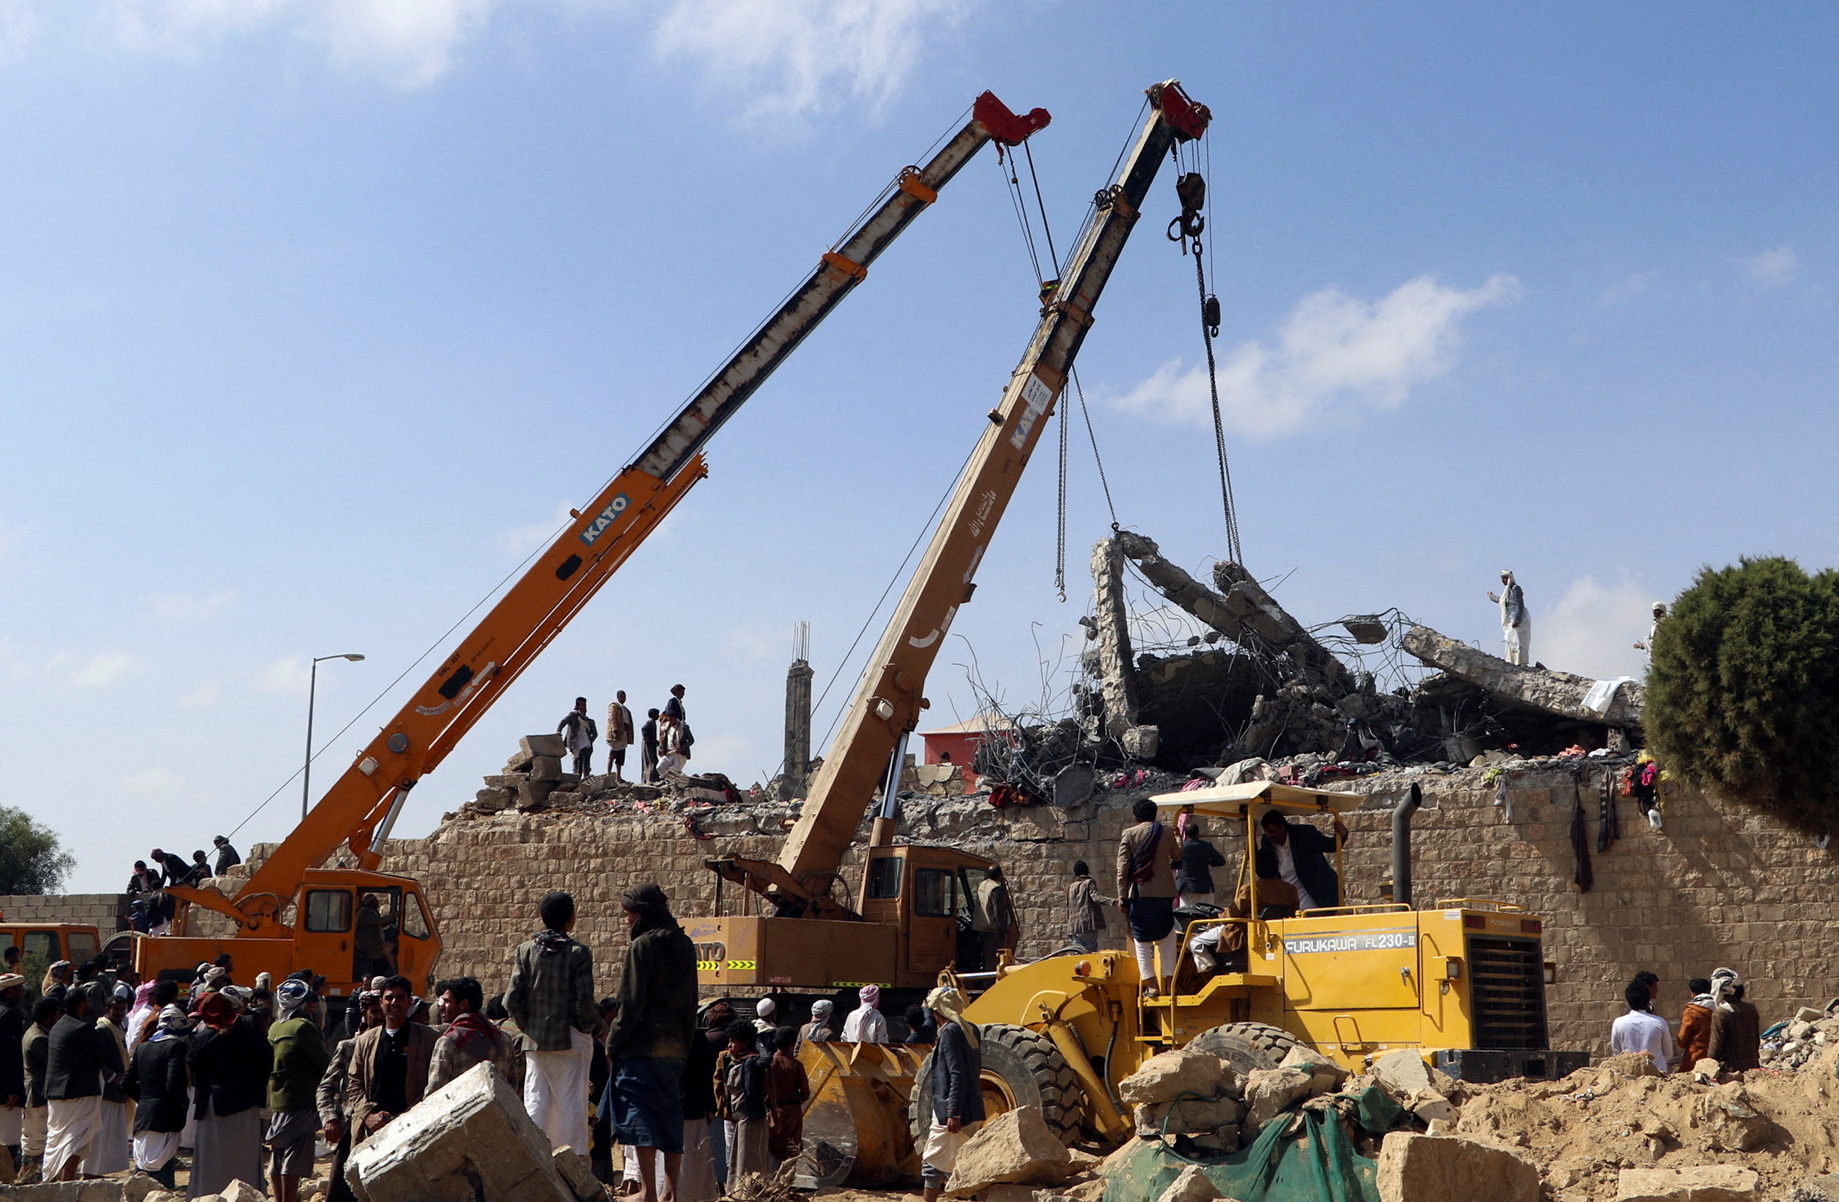 Rescuers use cranes to remove collapsed concrete roof of a detention center hit by air strikes in Saada